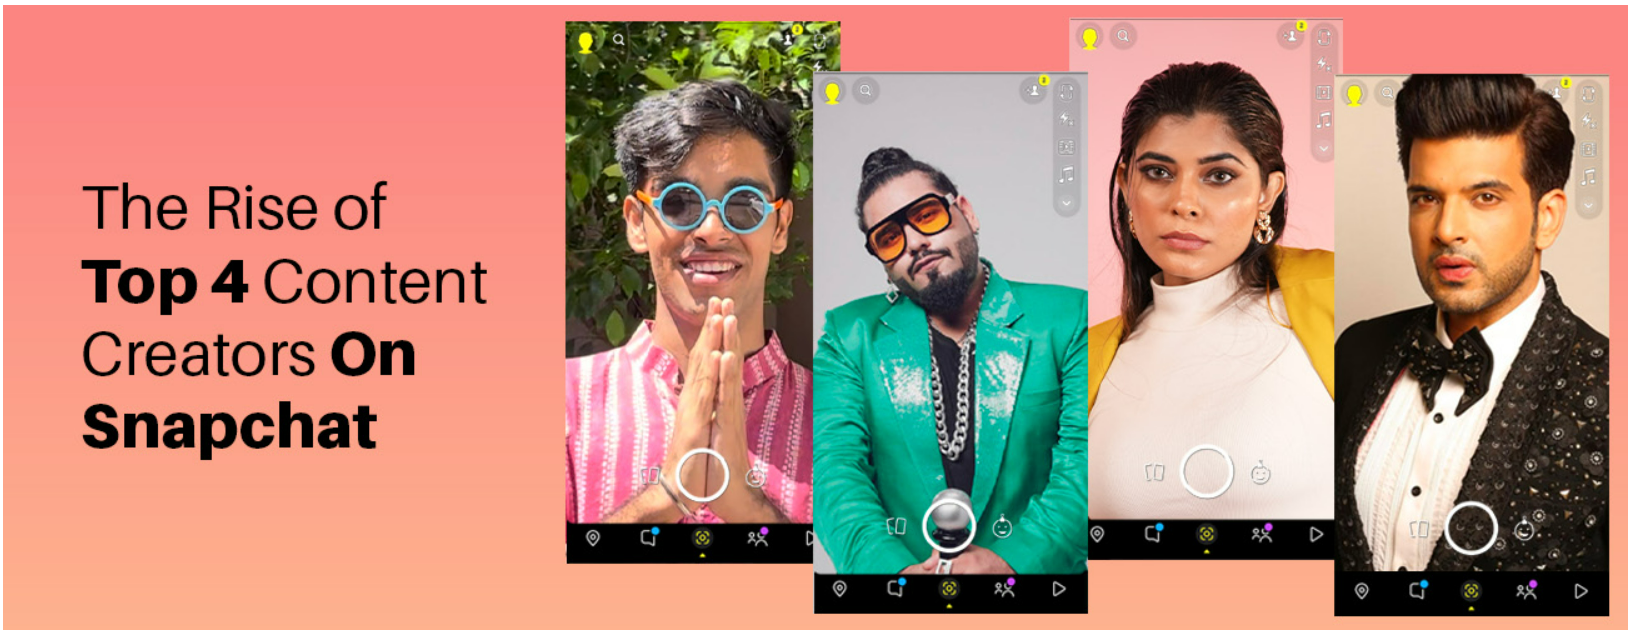 The Rise of Top 4 Content Creators On Snapchat